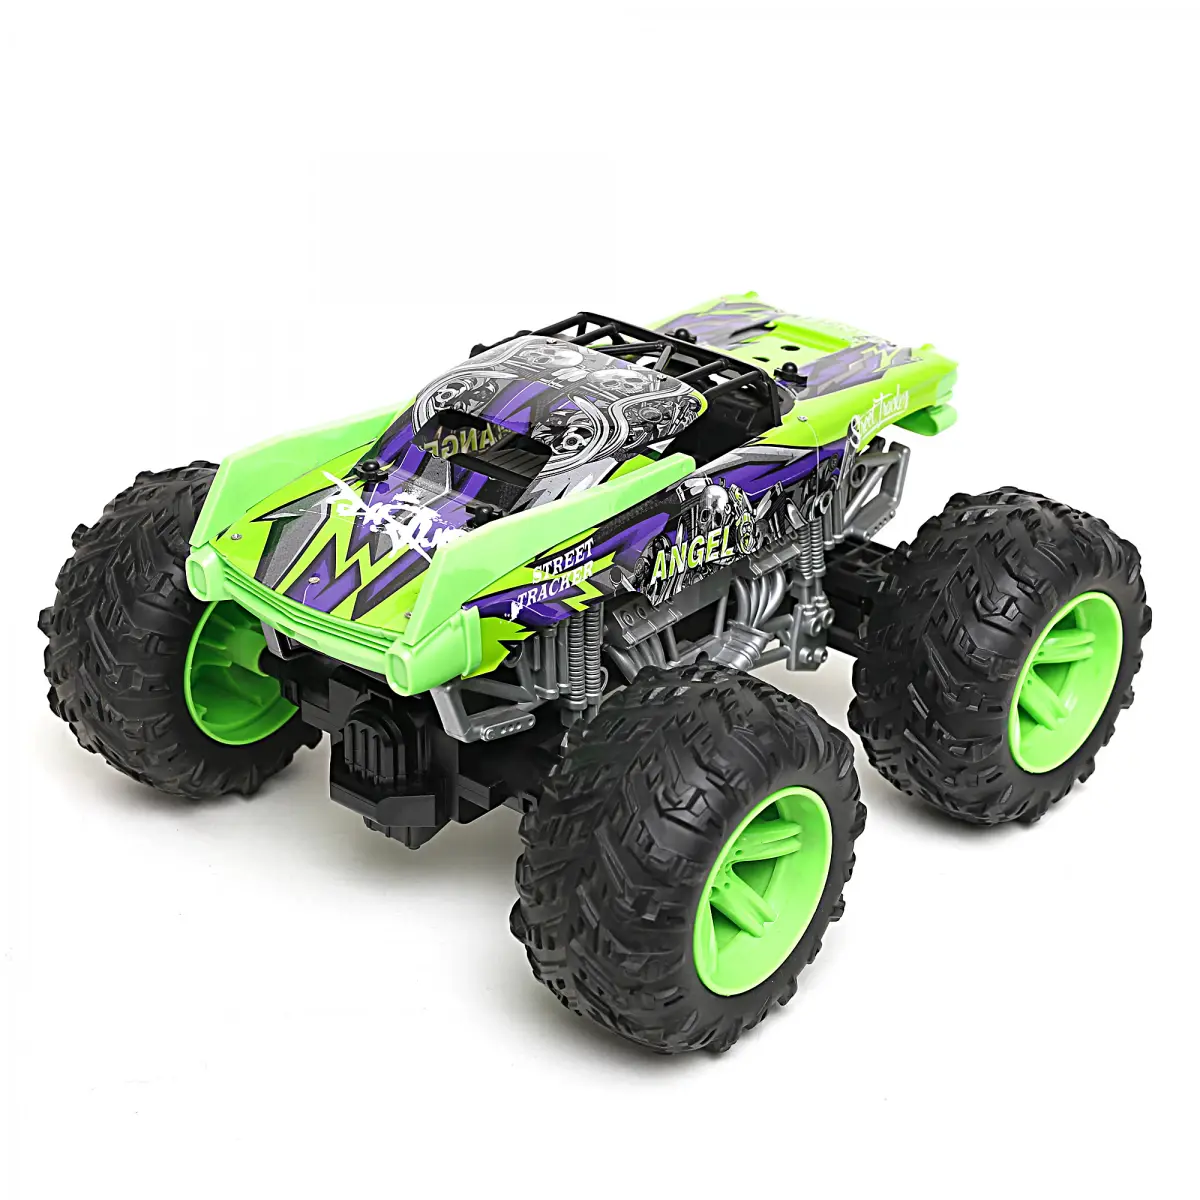 Ralleyz 1:12 Speed Racing Rc Car Grip Wheels With 2.4 Ghz Remote Control, Rechargeable Battery Green 8Y+